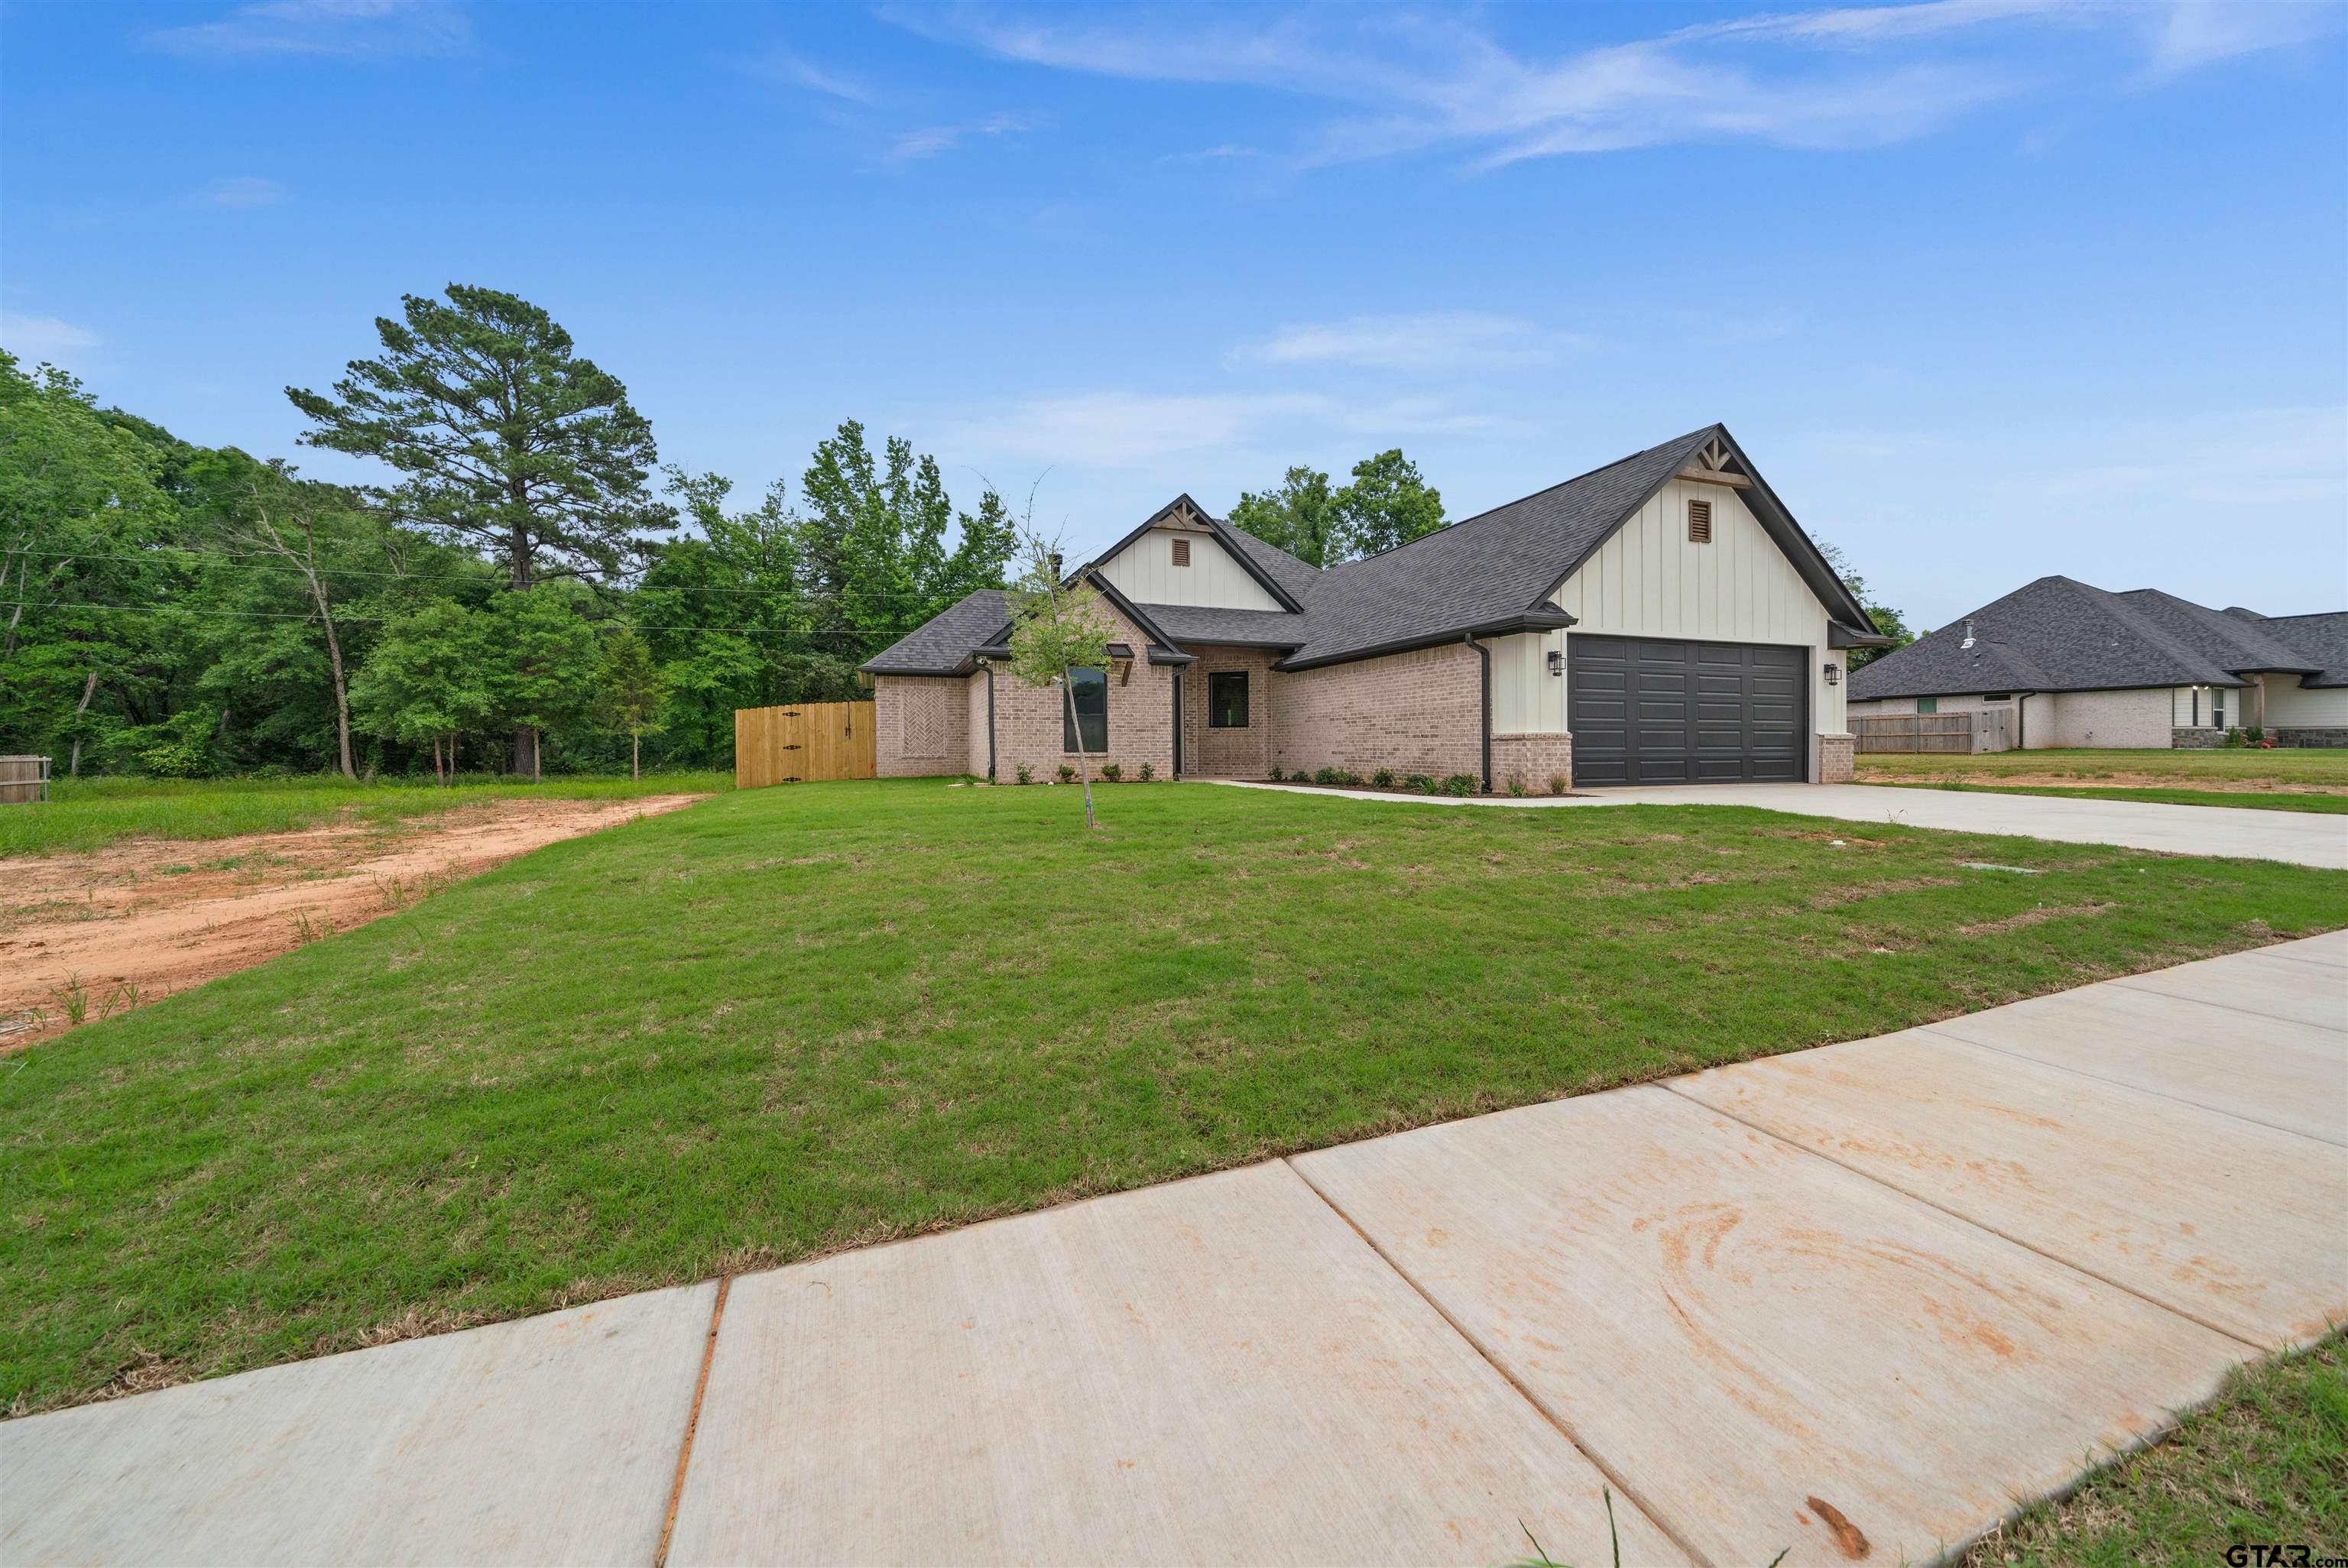 813 Redwing Way, Whitehouse, Texas 75791, 4 Bedrooms Bedrooms, ,2 BathroomsBathrooms,Single Family Detached,For Sale,Redwing Way,24005818